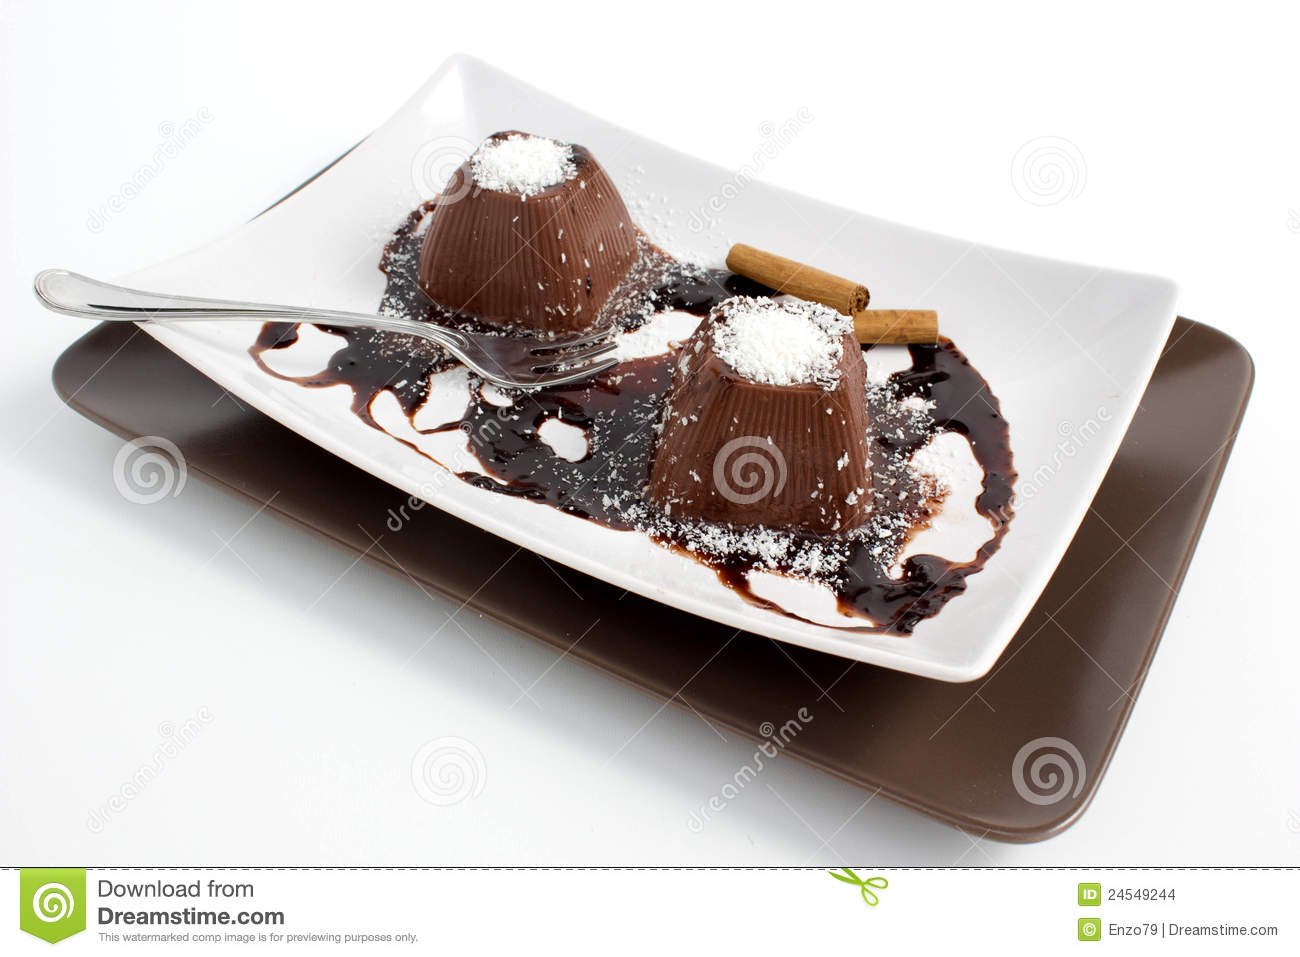 Chocolate Pudding With Cinnamon And Coconut On A White Background